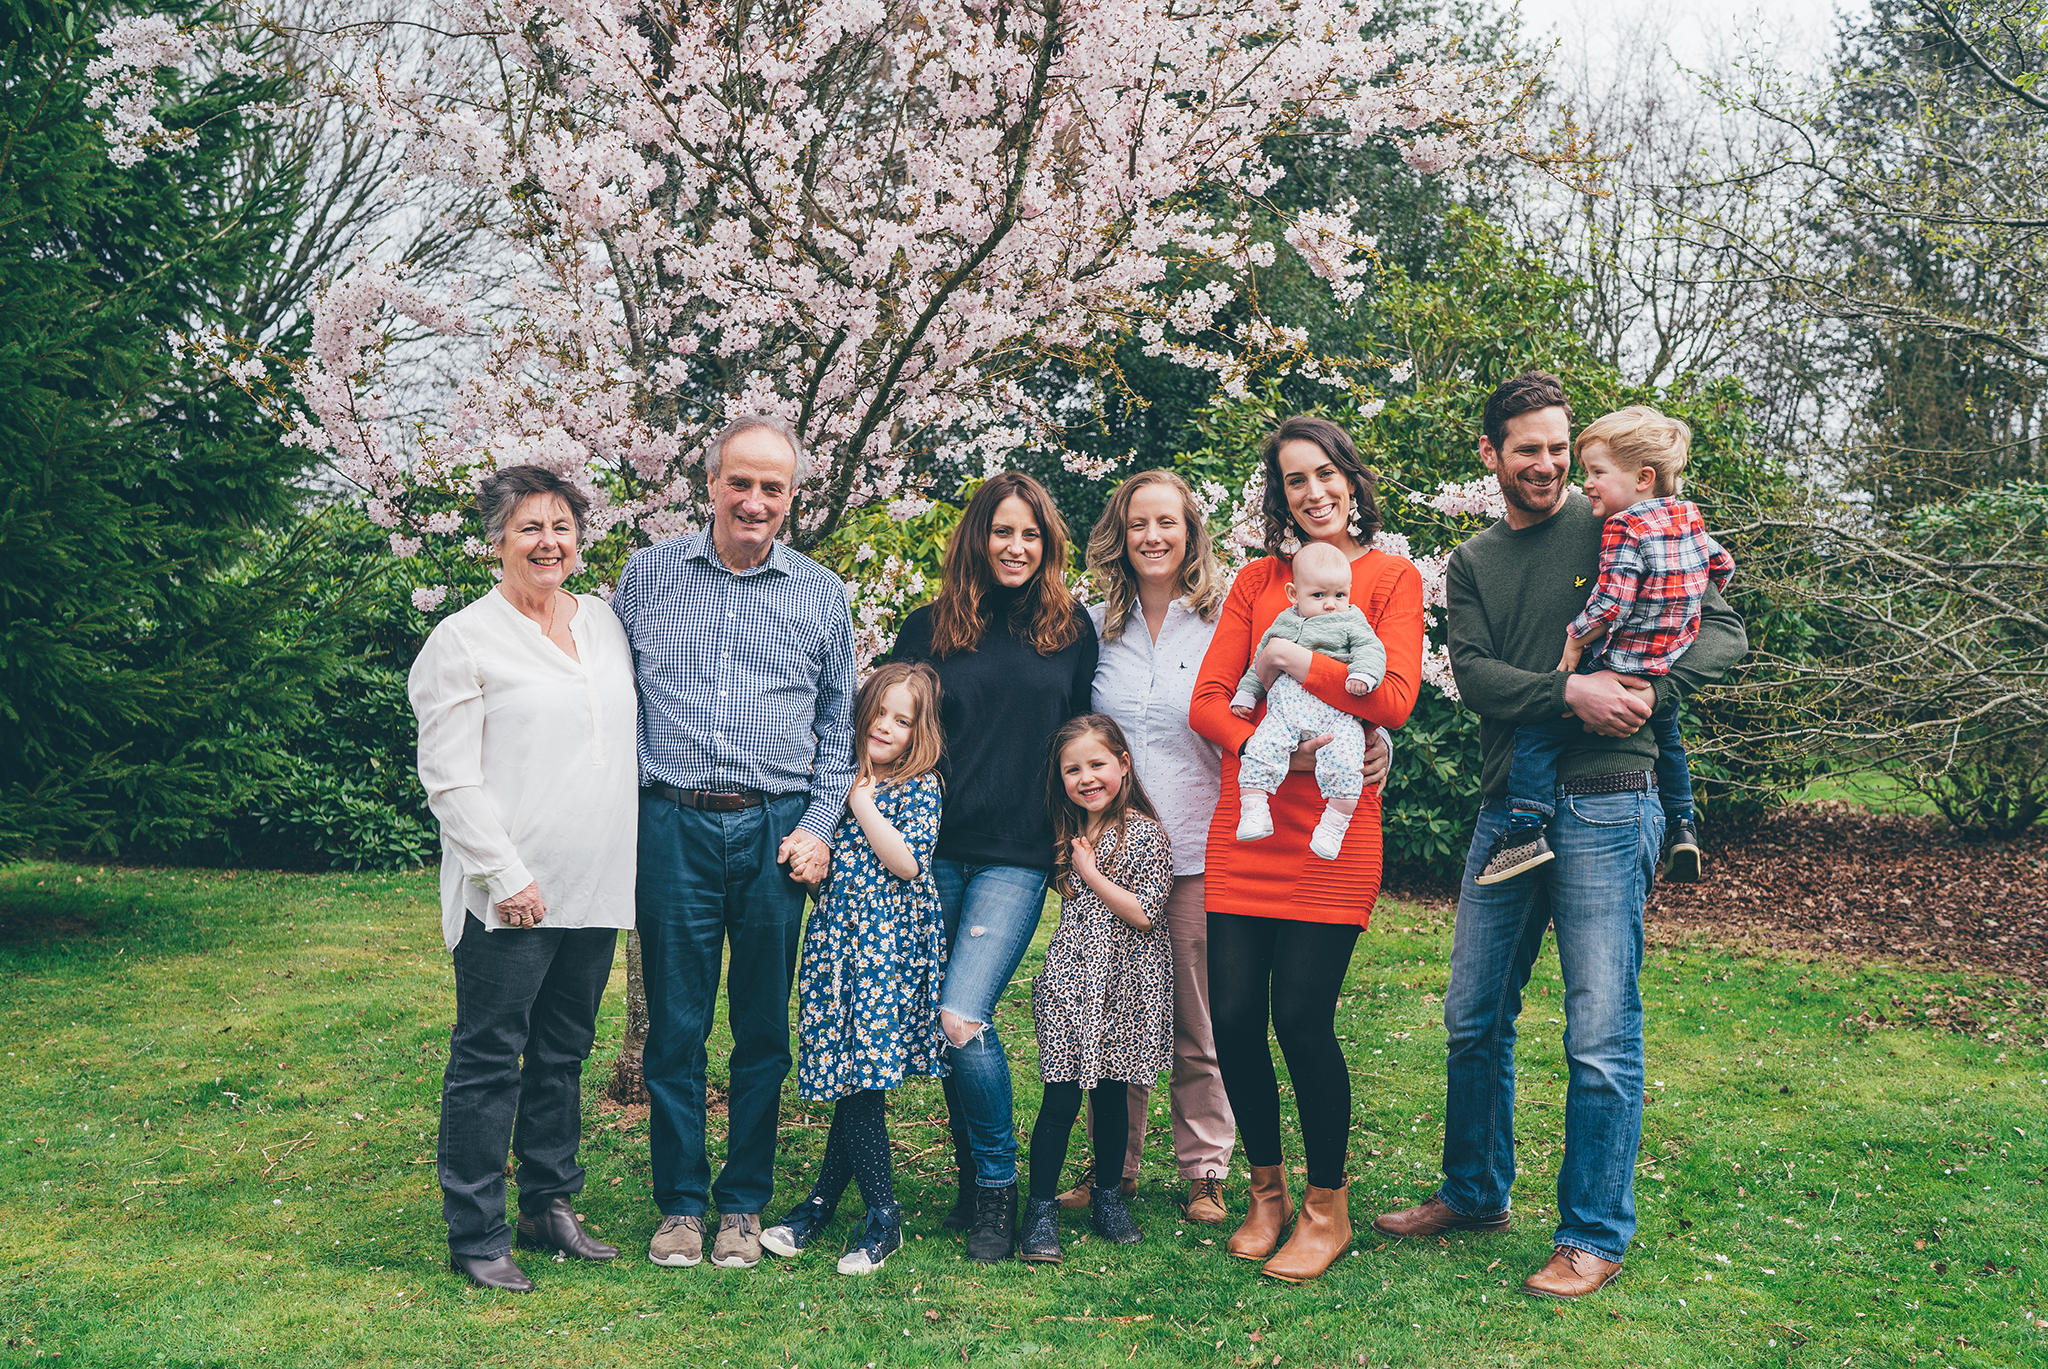 Lifestyle Photography – Family Portrait at The Hollies